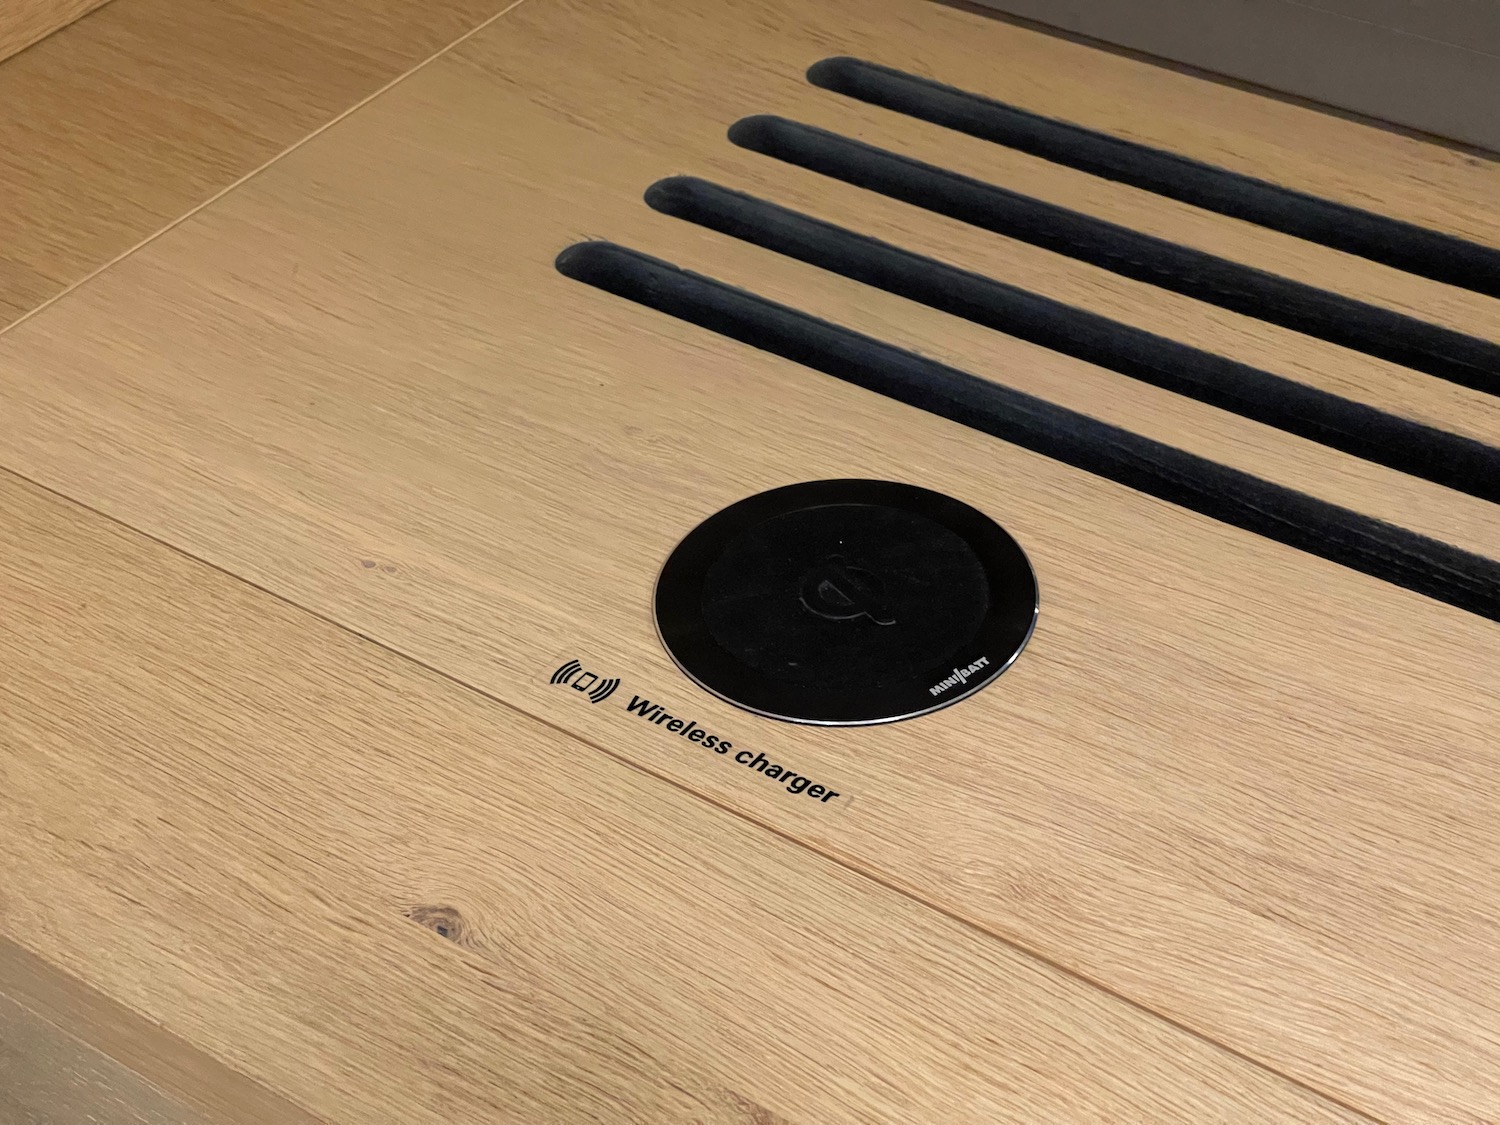 a black circular object on a wooden surface